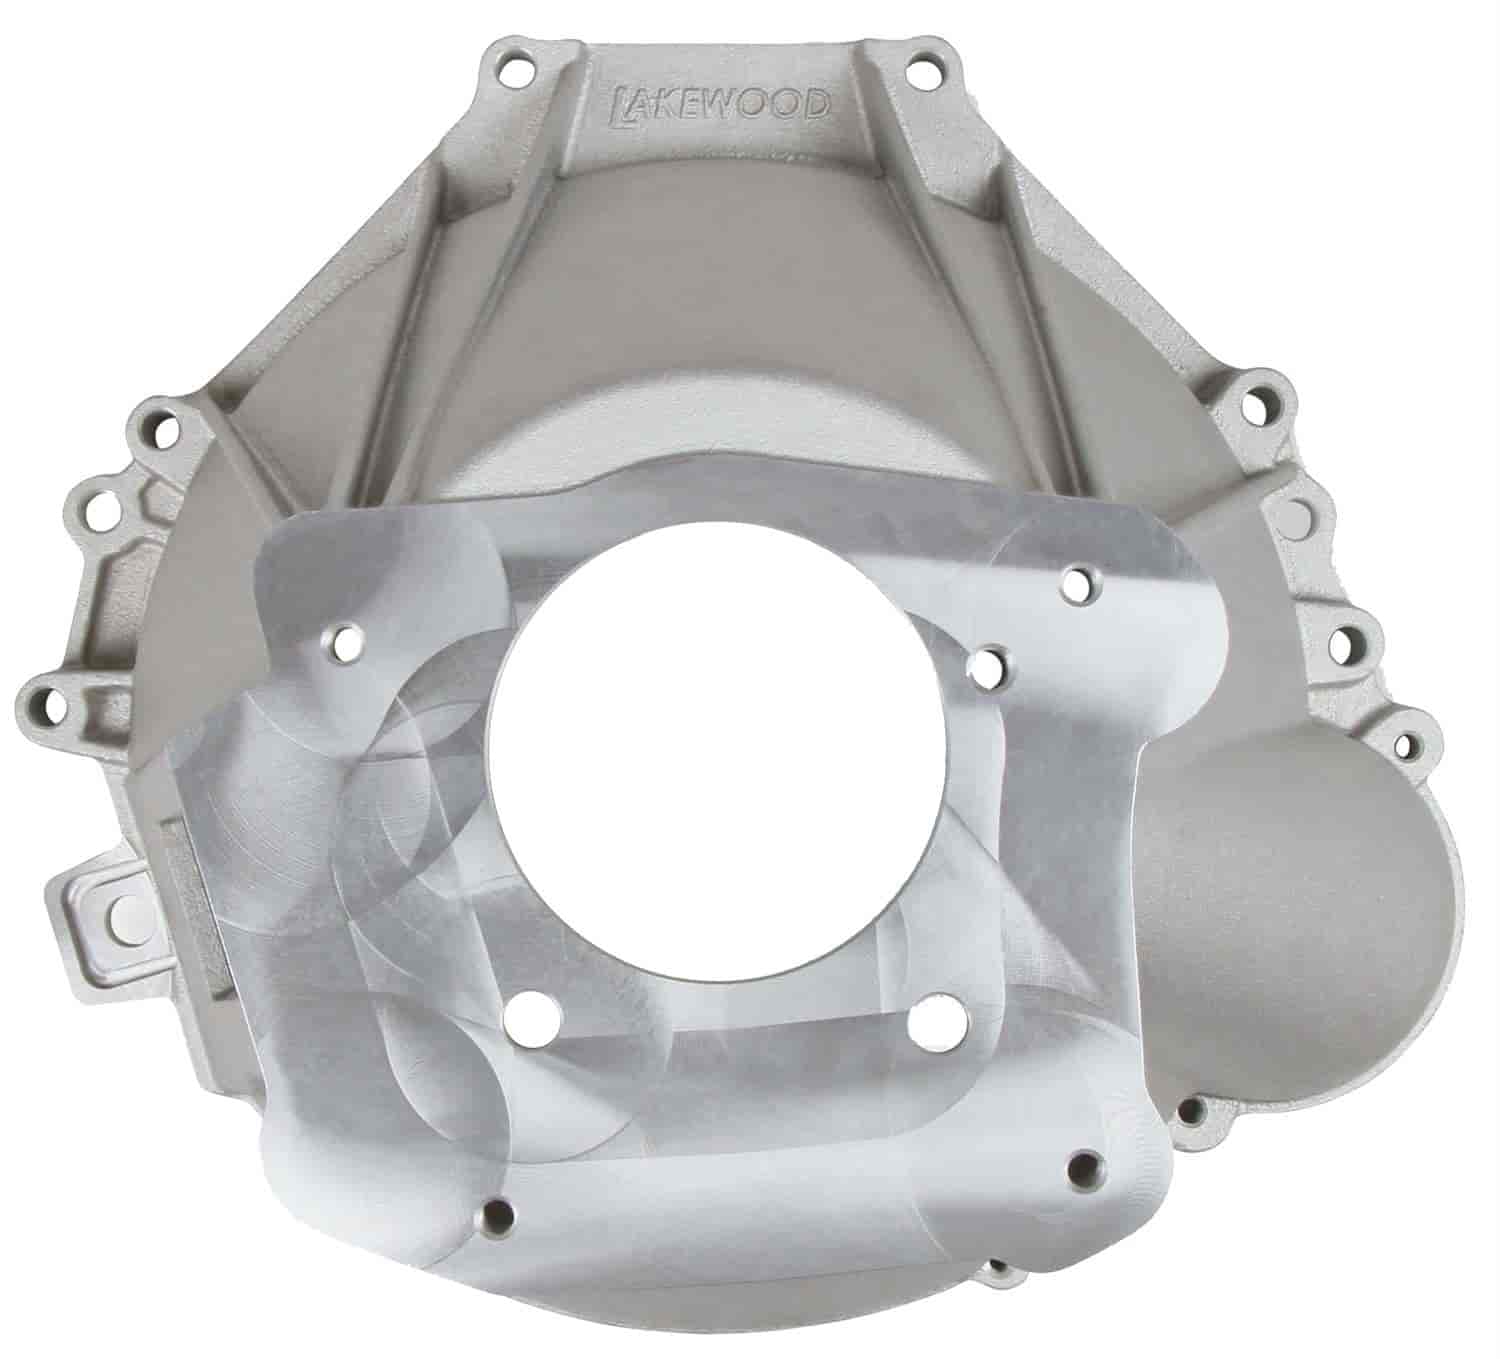 Cast-Aluminum Bellhousing for Small Block Ford Engine to Ford-Style T5 Transmission